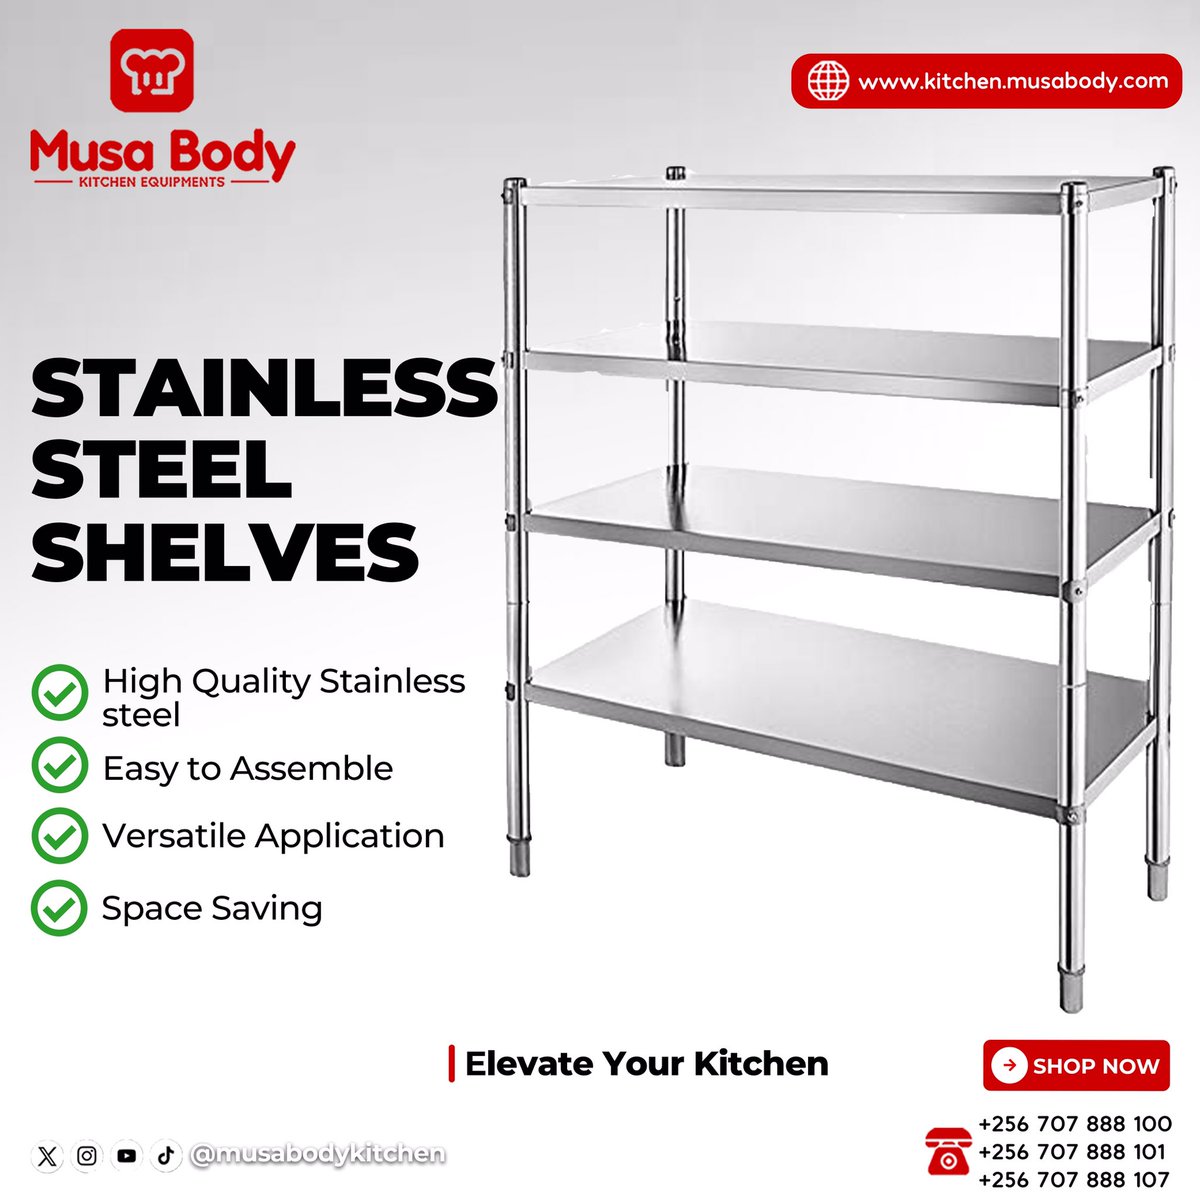 Stainless steel shelves, in particular, are a popular choice for storage and display needs in office, retail, food service, laboratory, and residential environments. Available @musabodykitchen #KampalaCreme